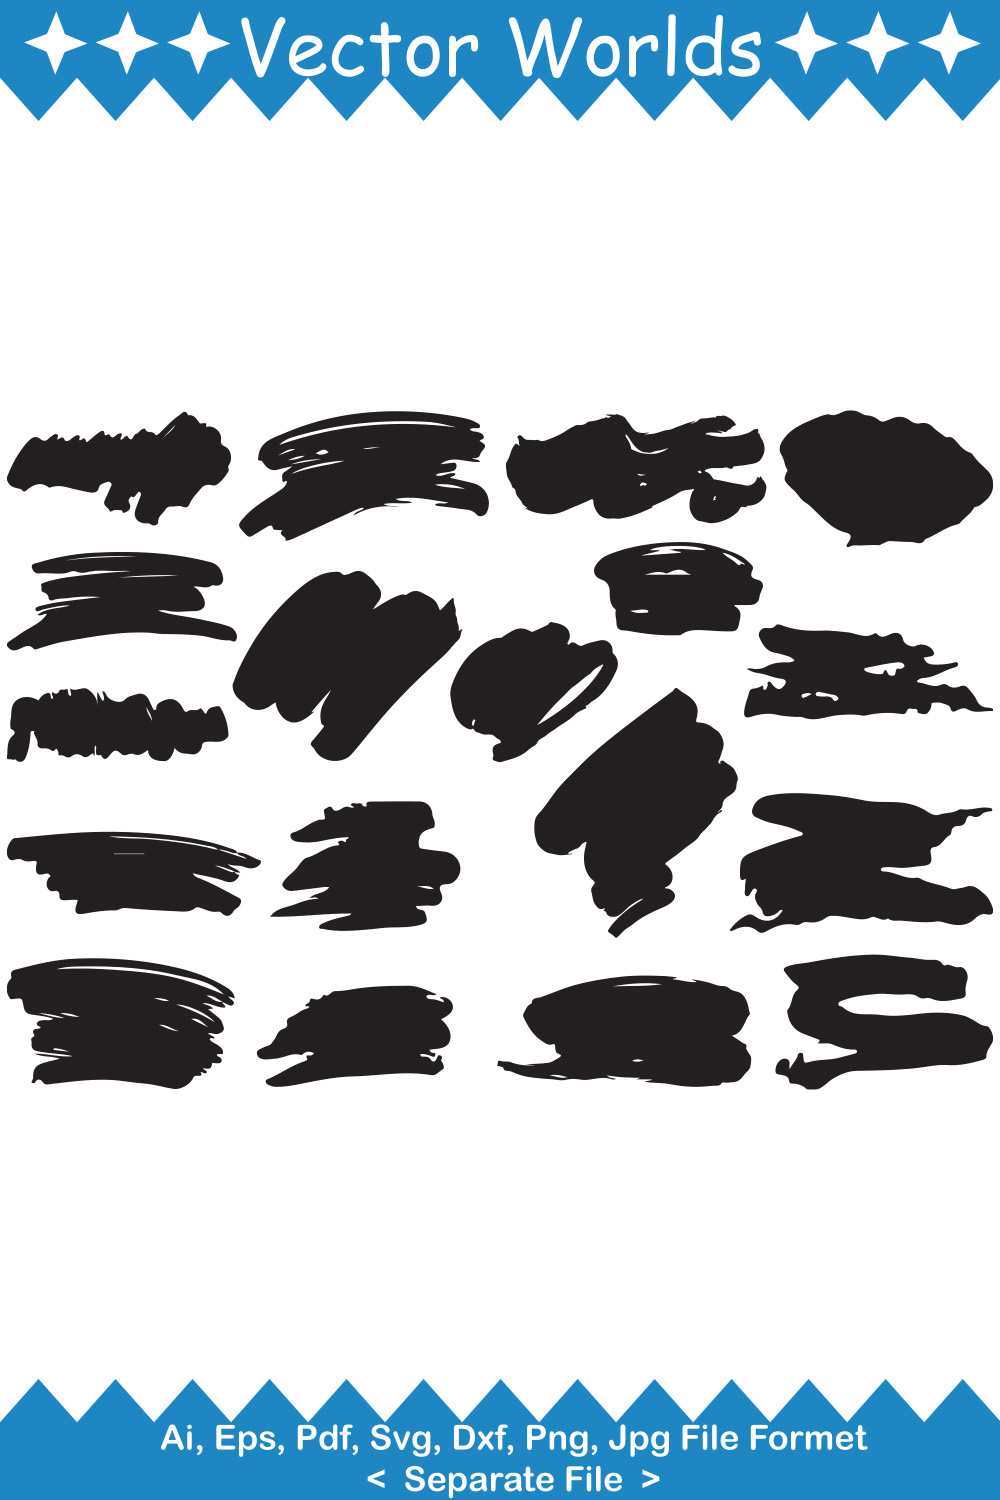 Collection of vector enchanting images of silhouettes of brush strokes.